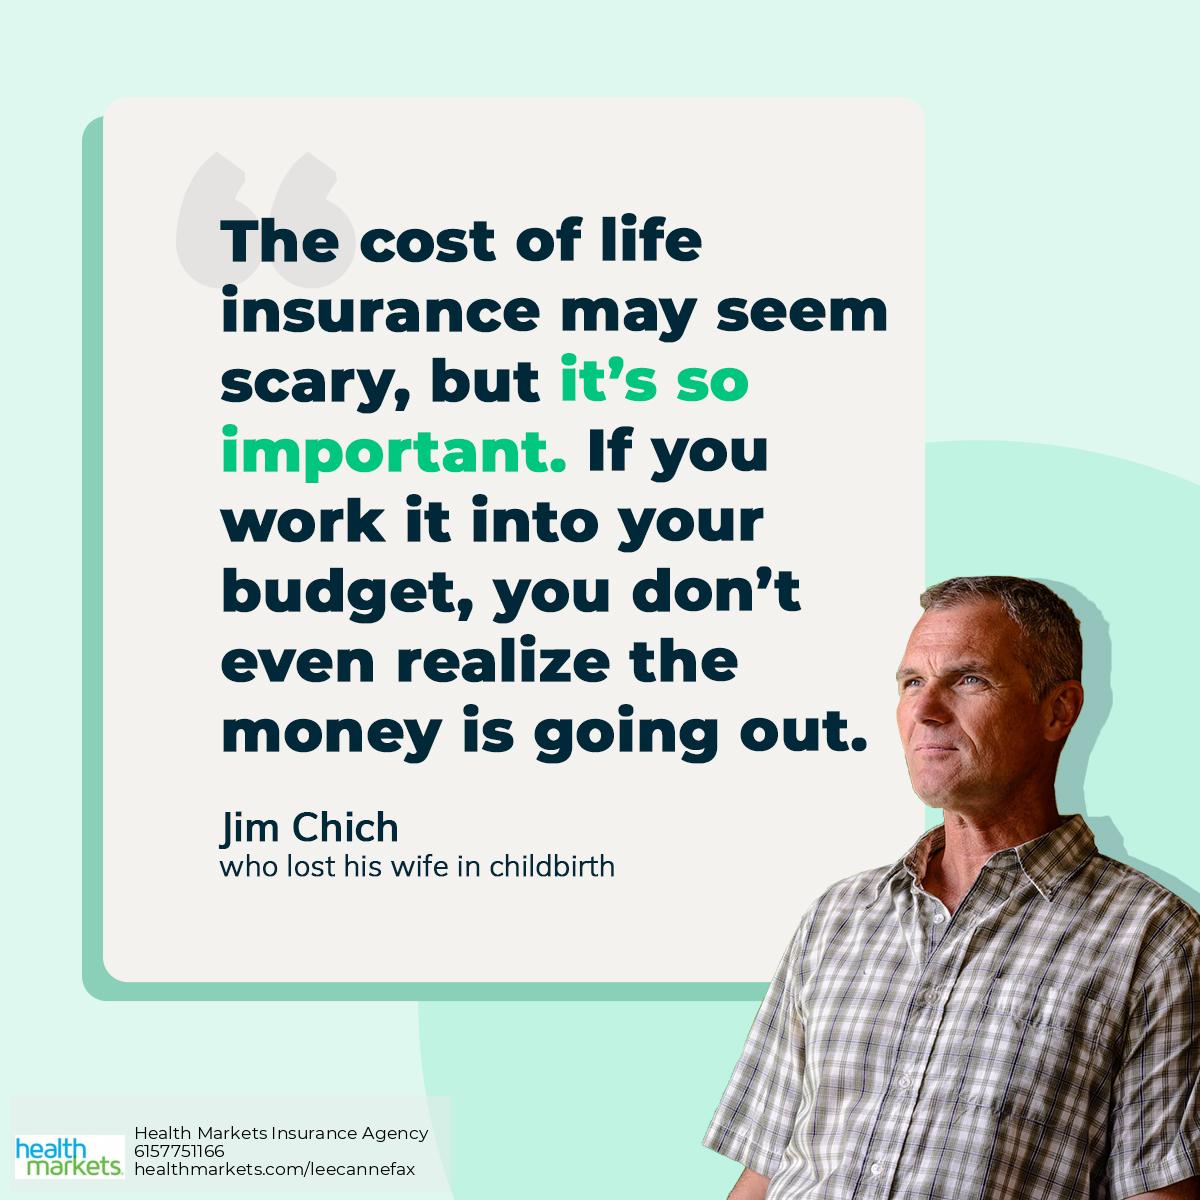 Jenny purchased permanent life insurance early on. As her family grew, finances became tight. Jim, her husband, suggested they cancel the policy to save money, but Jenny was adamant about keeping it  — a decision that turned out to be life-changing. #GetLifeInsurance #LIAM21 https://t.co/I0iHqLKhoB